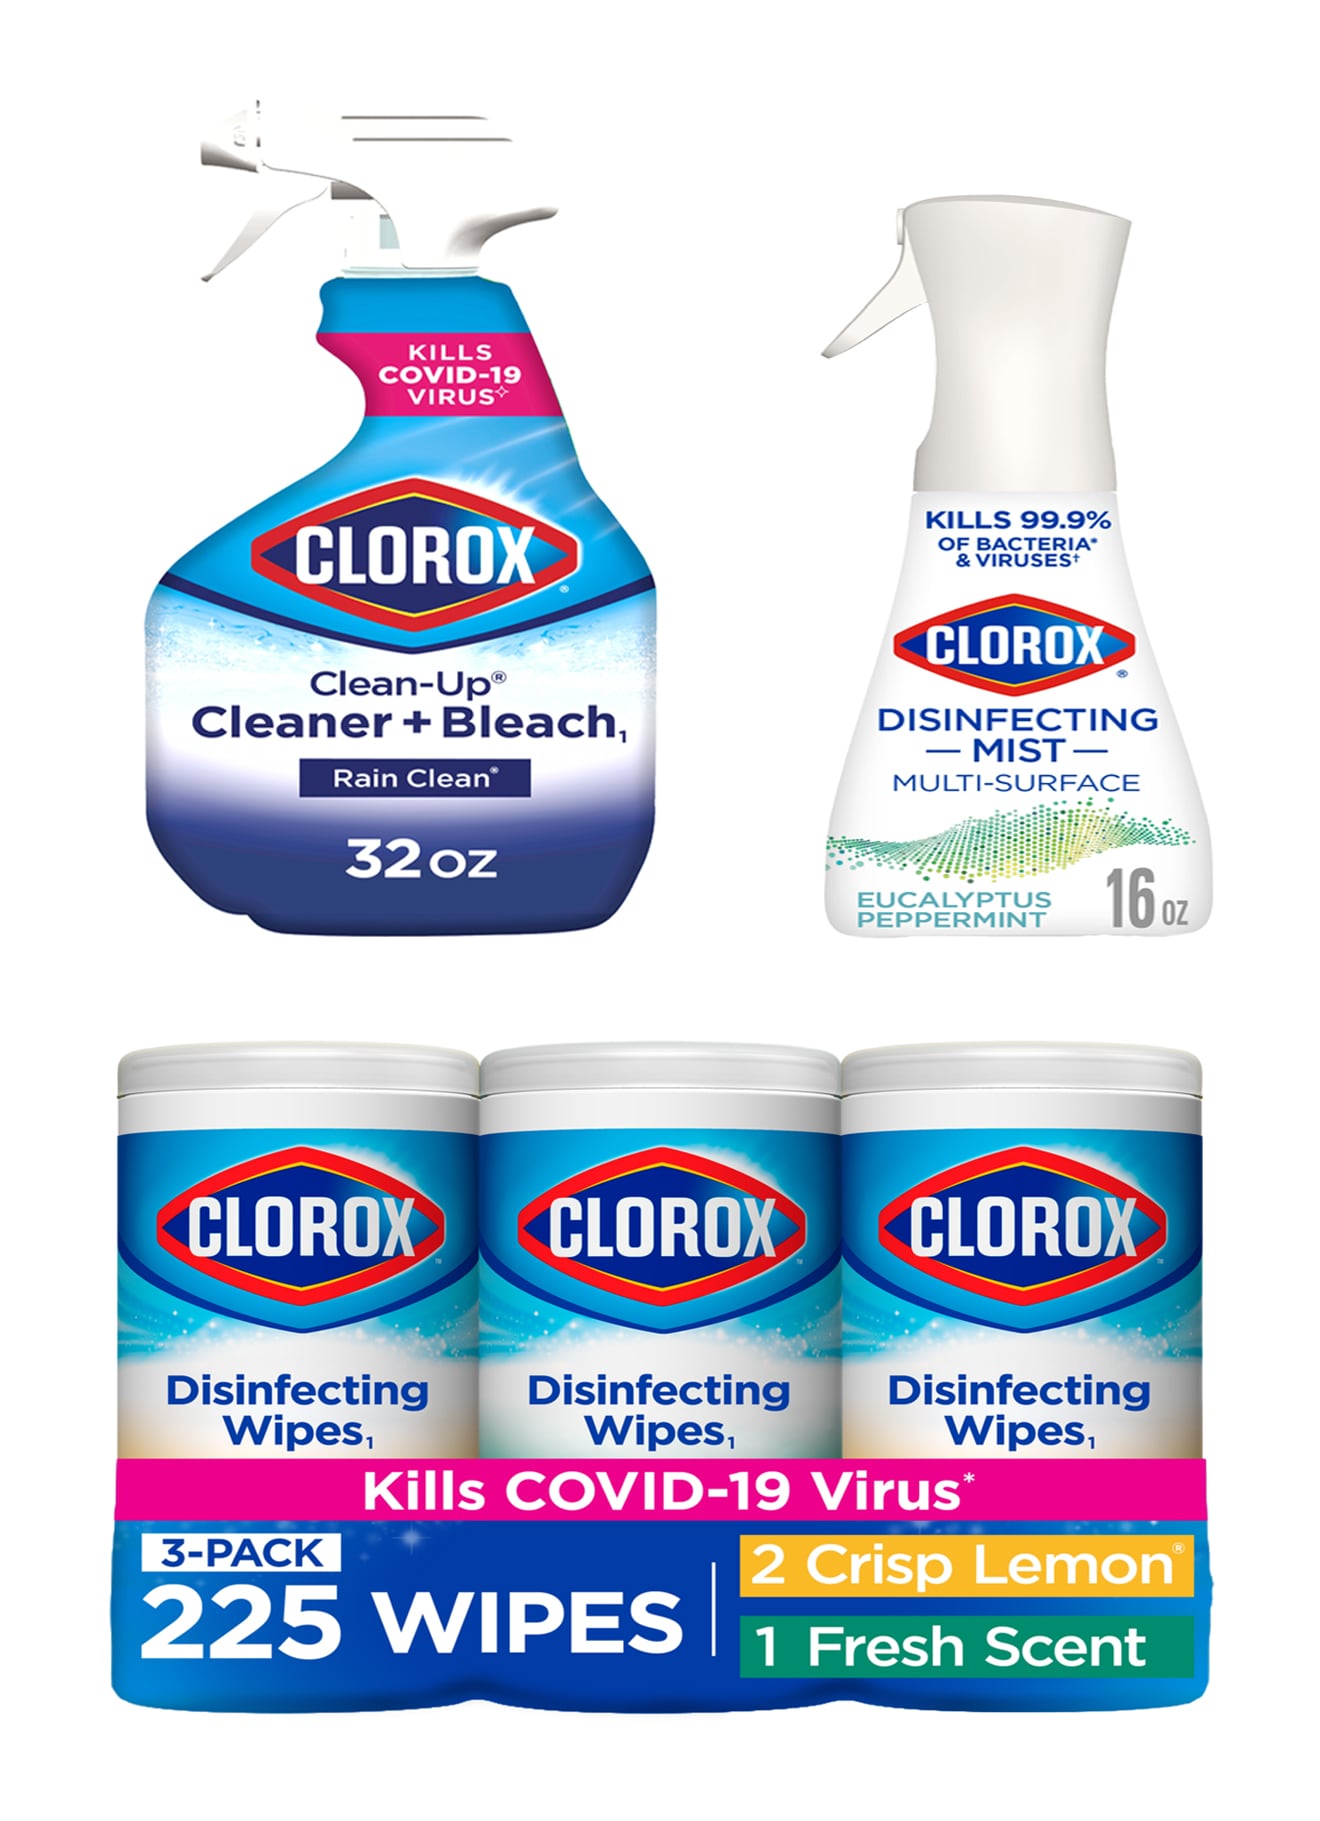 Shop Clorox Kitchen Cleaning Supplies with Disinfecting Wipes